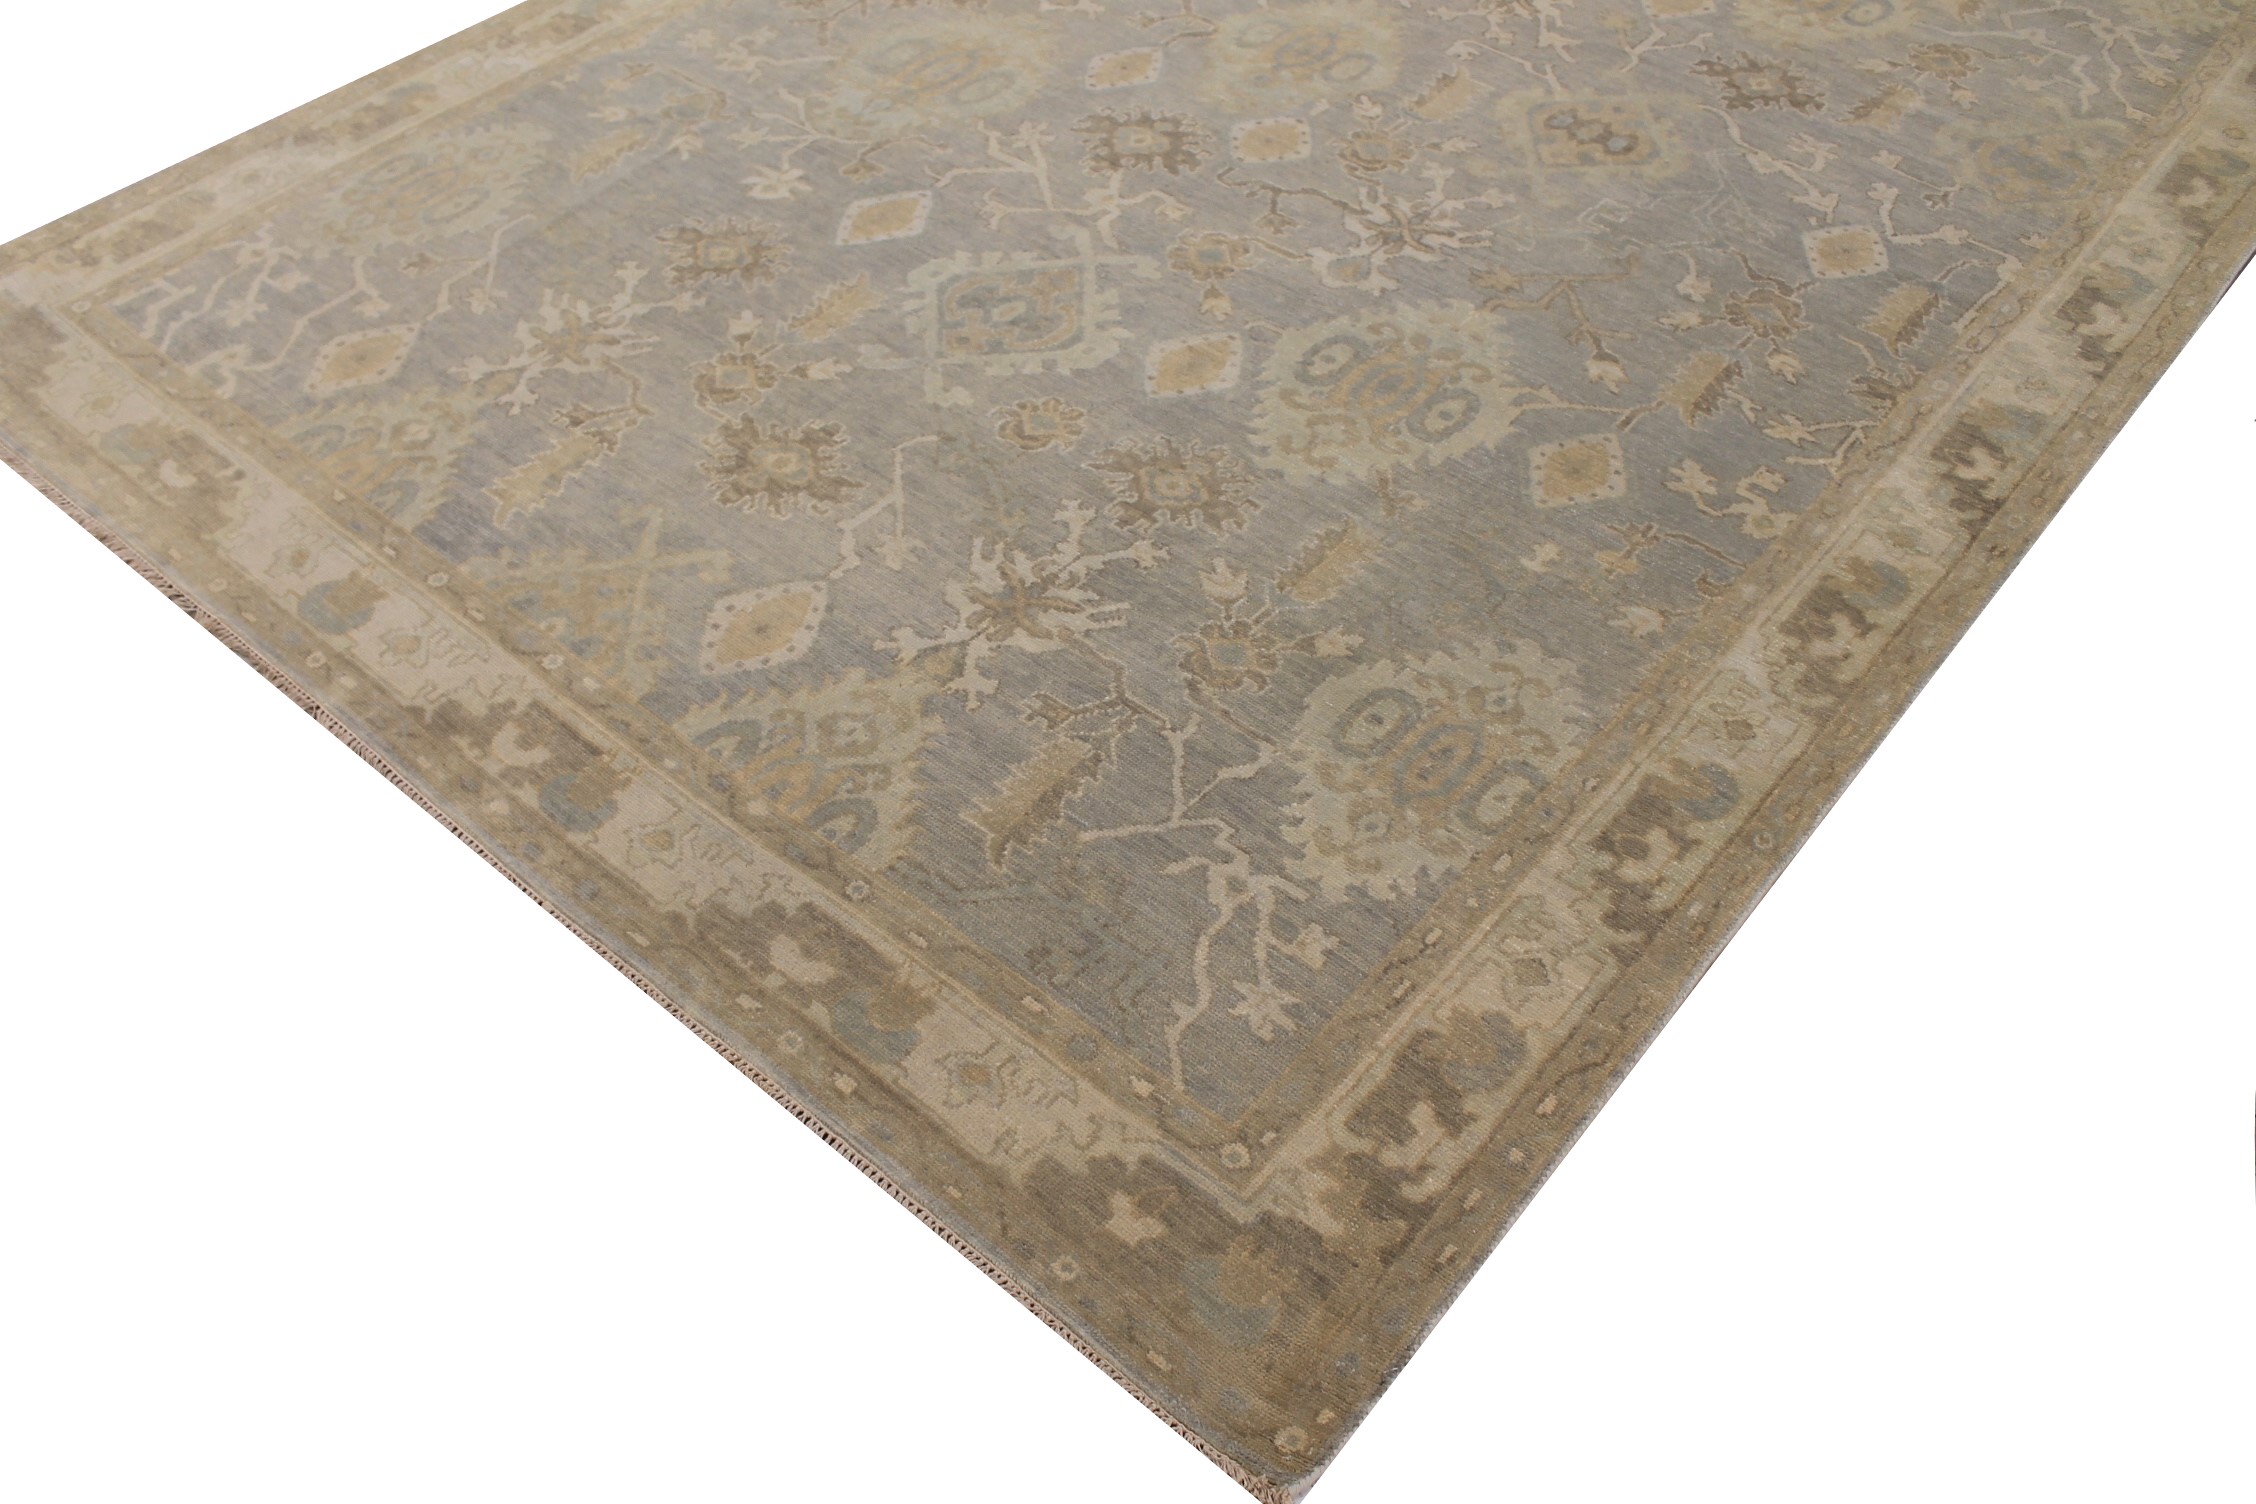 9x12 Oushak Hand Knotted Wool Area Rug - MR028077